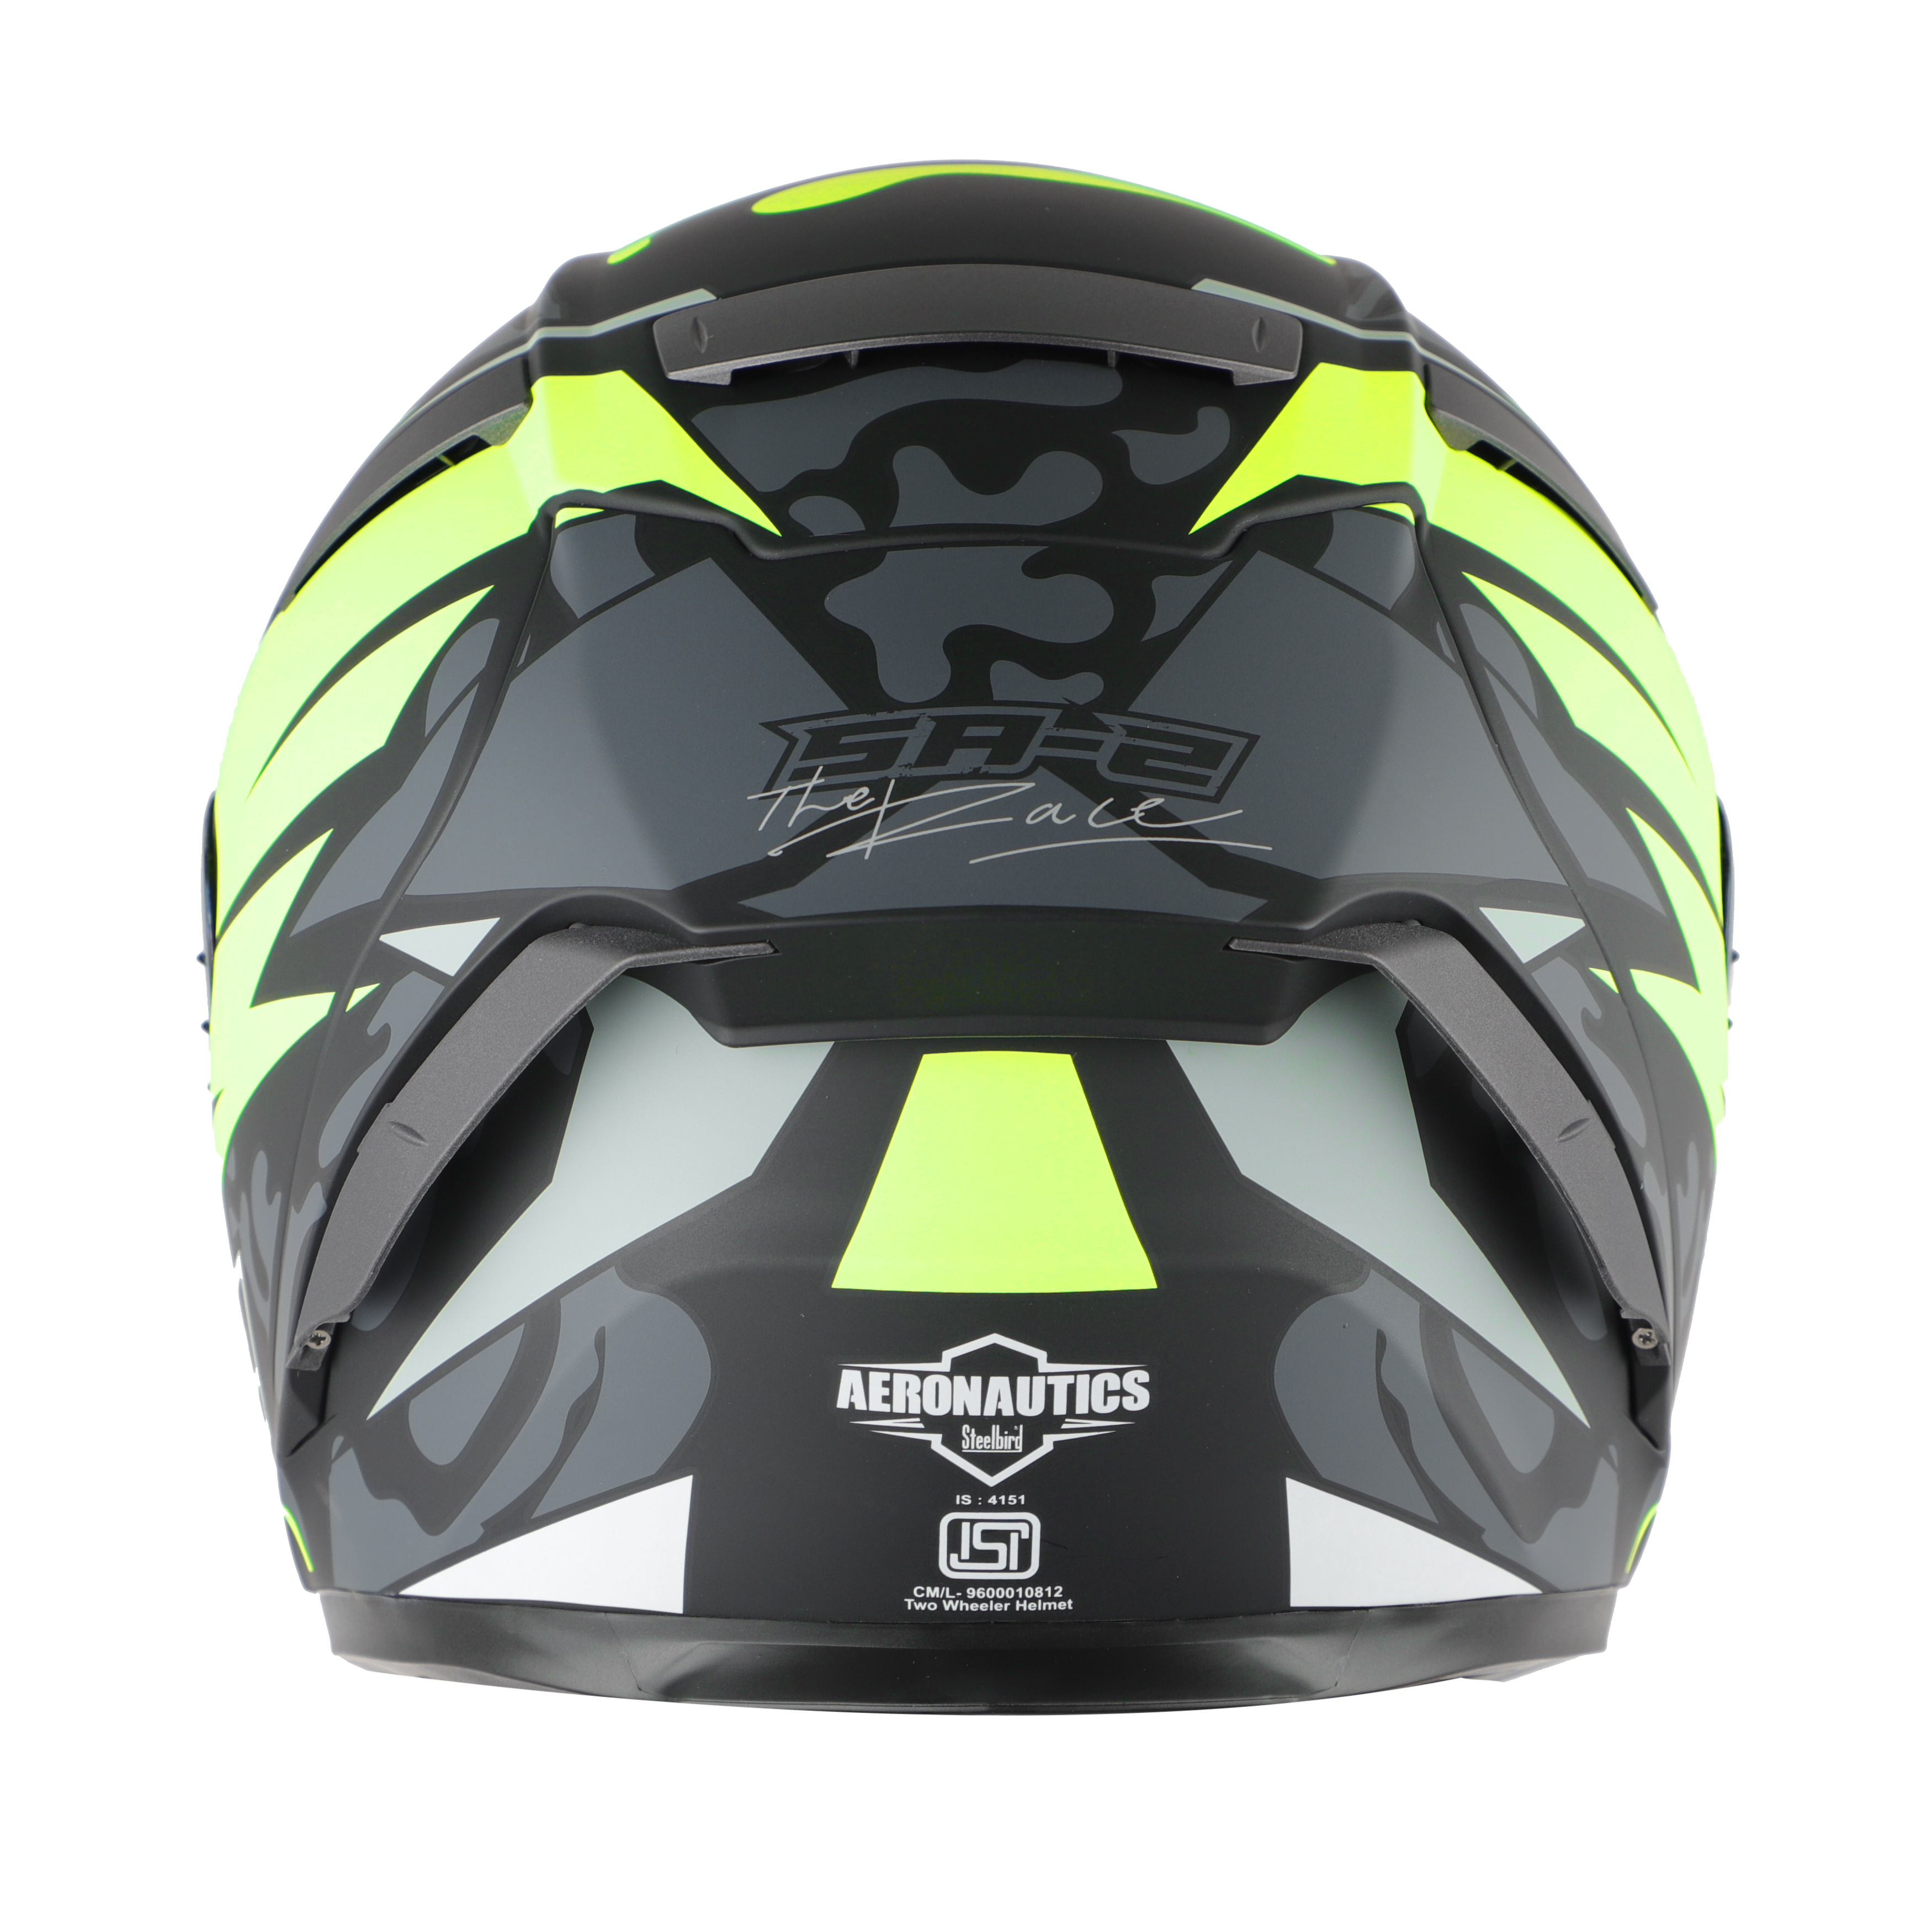 SA-2 TERMINATOR 3.0 MAT BLACK WITH NEON FITTED WITH CLEAR VISOR EXTRA SMOKE VISOR FREE (WITH ANTI-FOR SHIELD HOLDER)